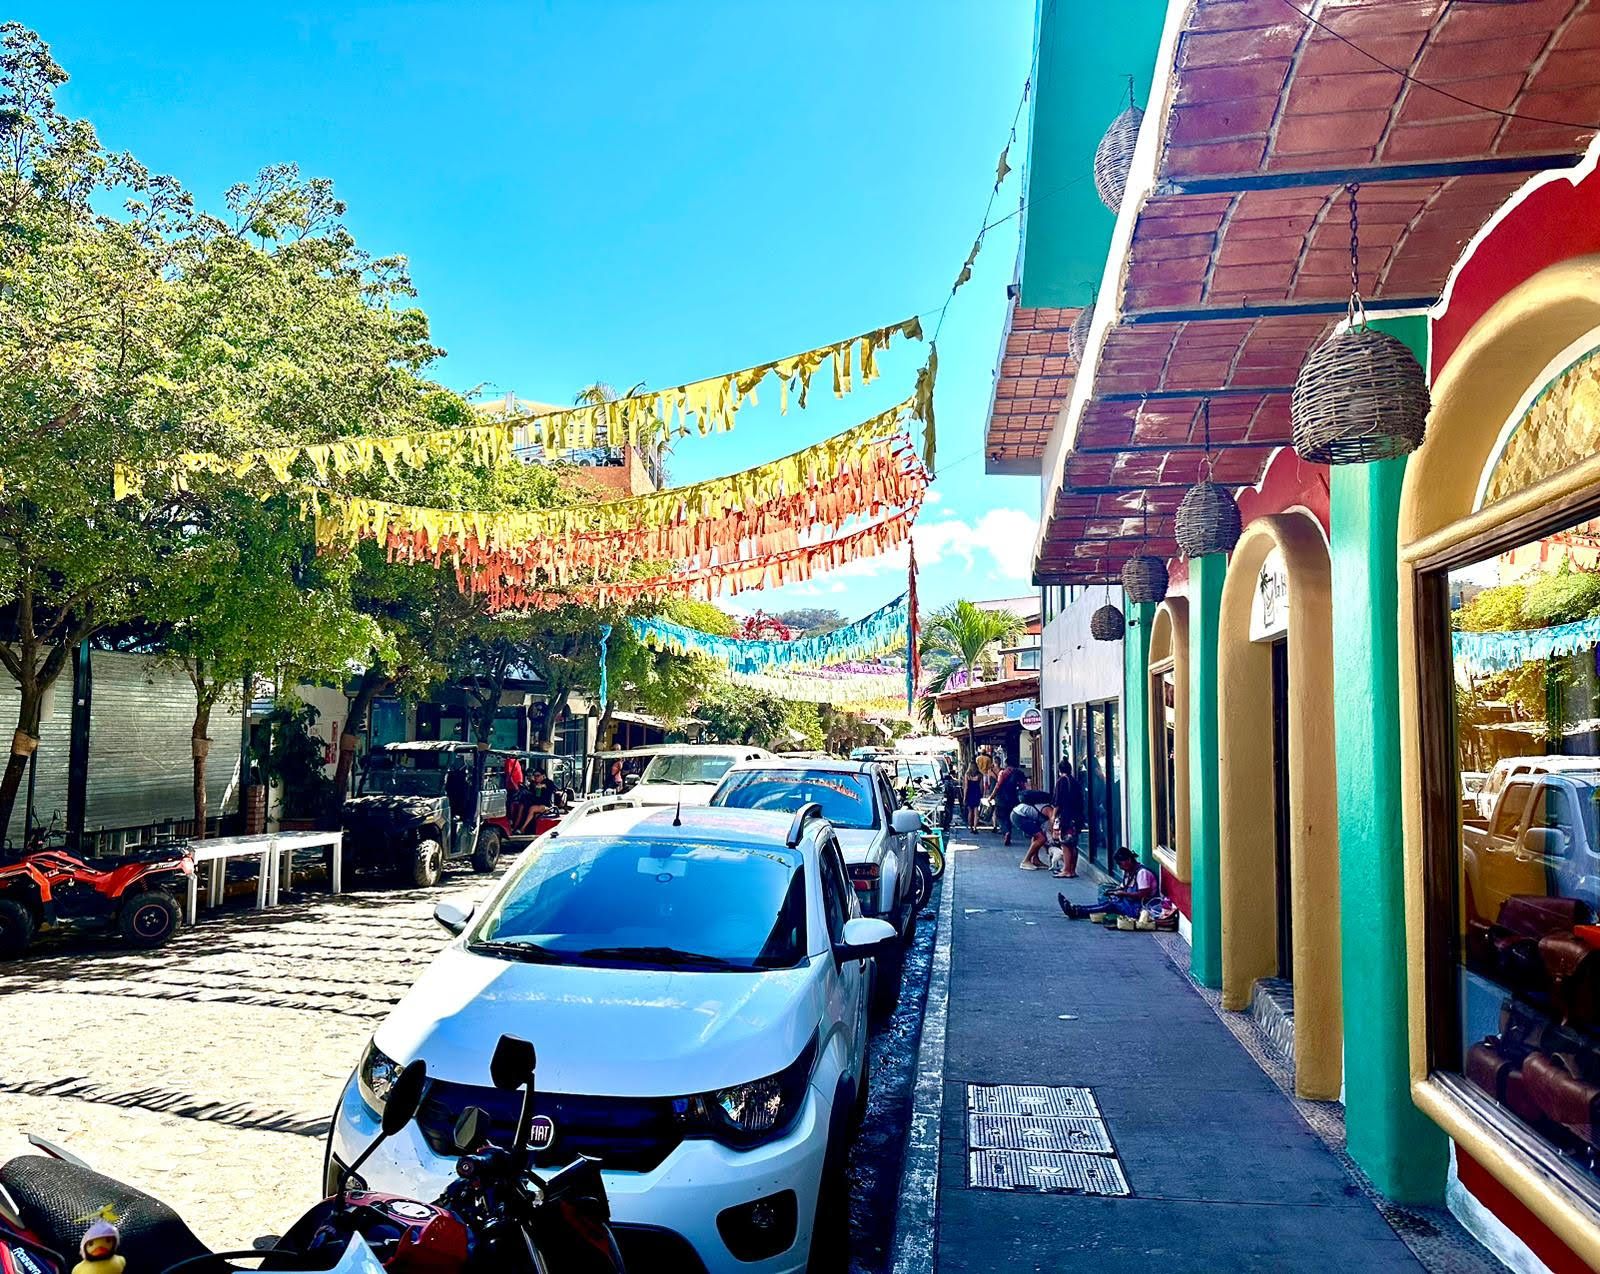 The streets of Sayulita, Mexico with banners, colourful buildings and cars